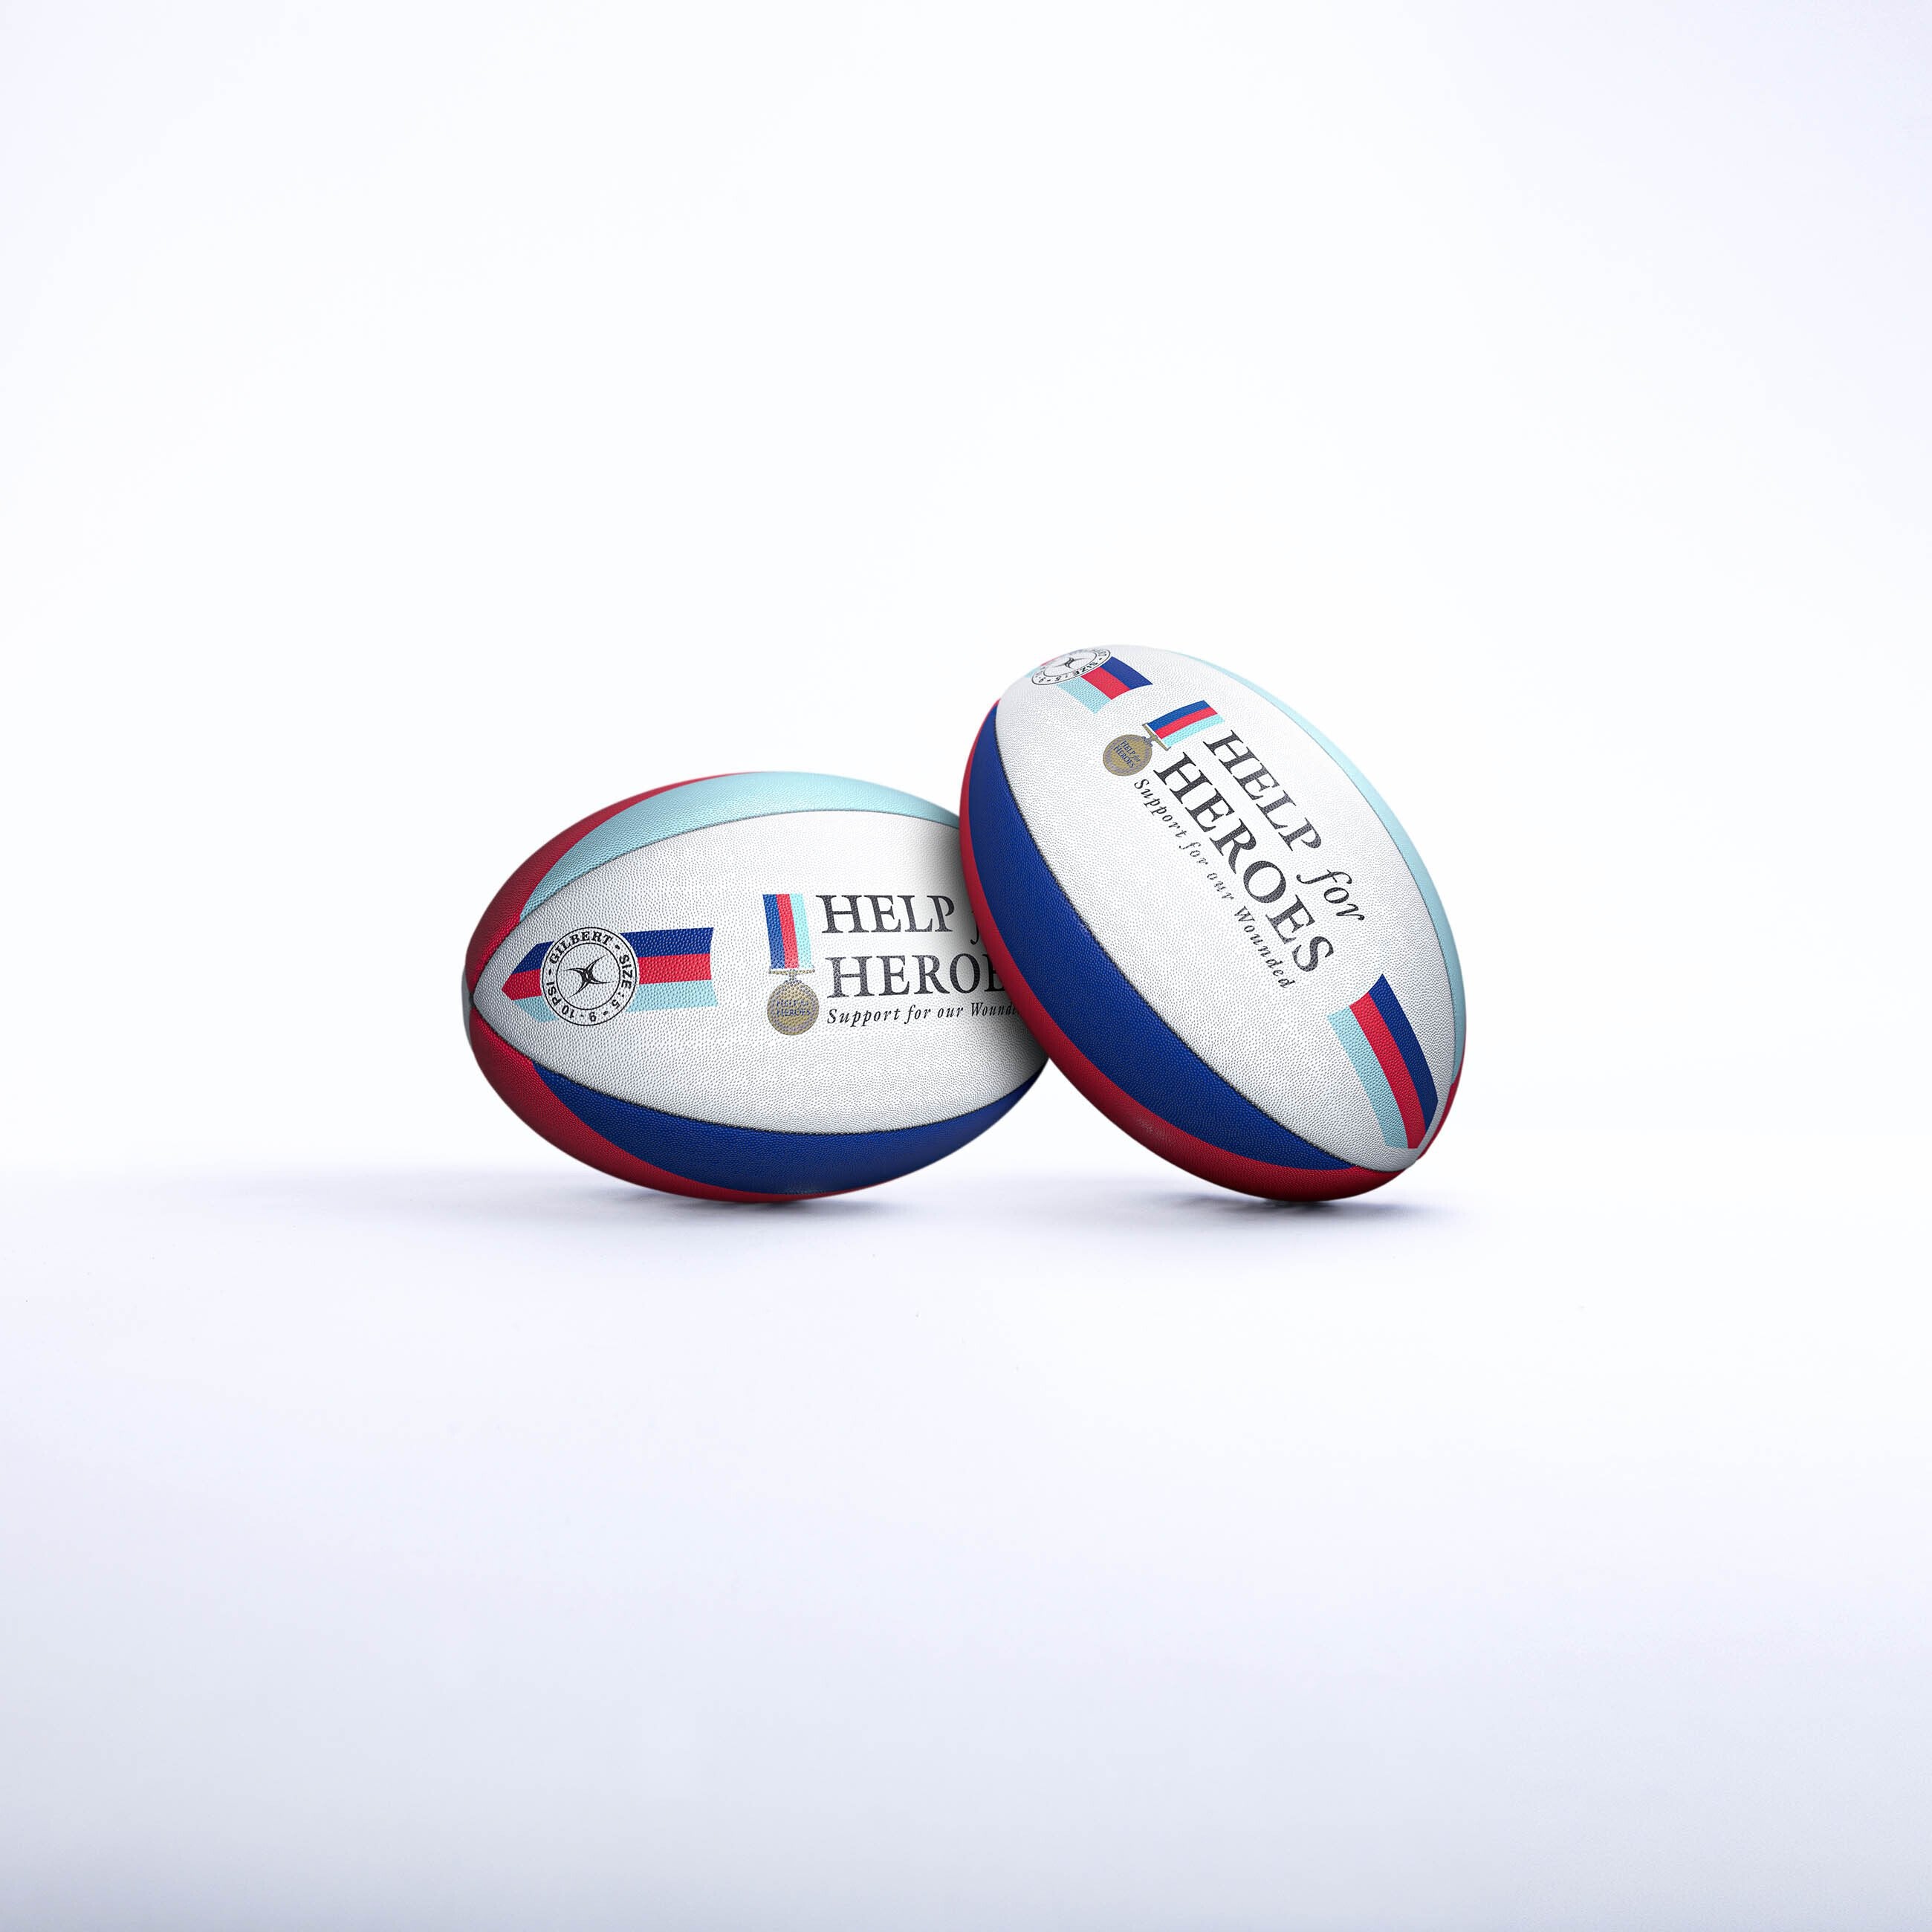 RDED13Replica Balls HELP FOR HEROES SUPPORTER SZ 5 UV 2